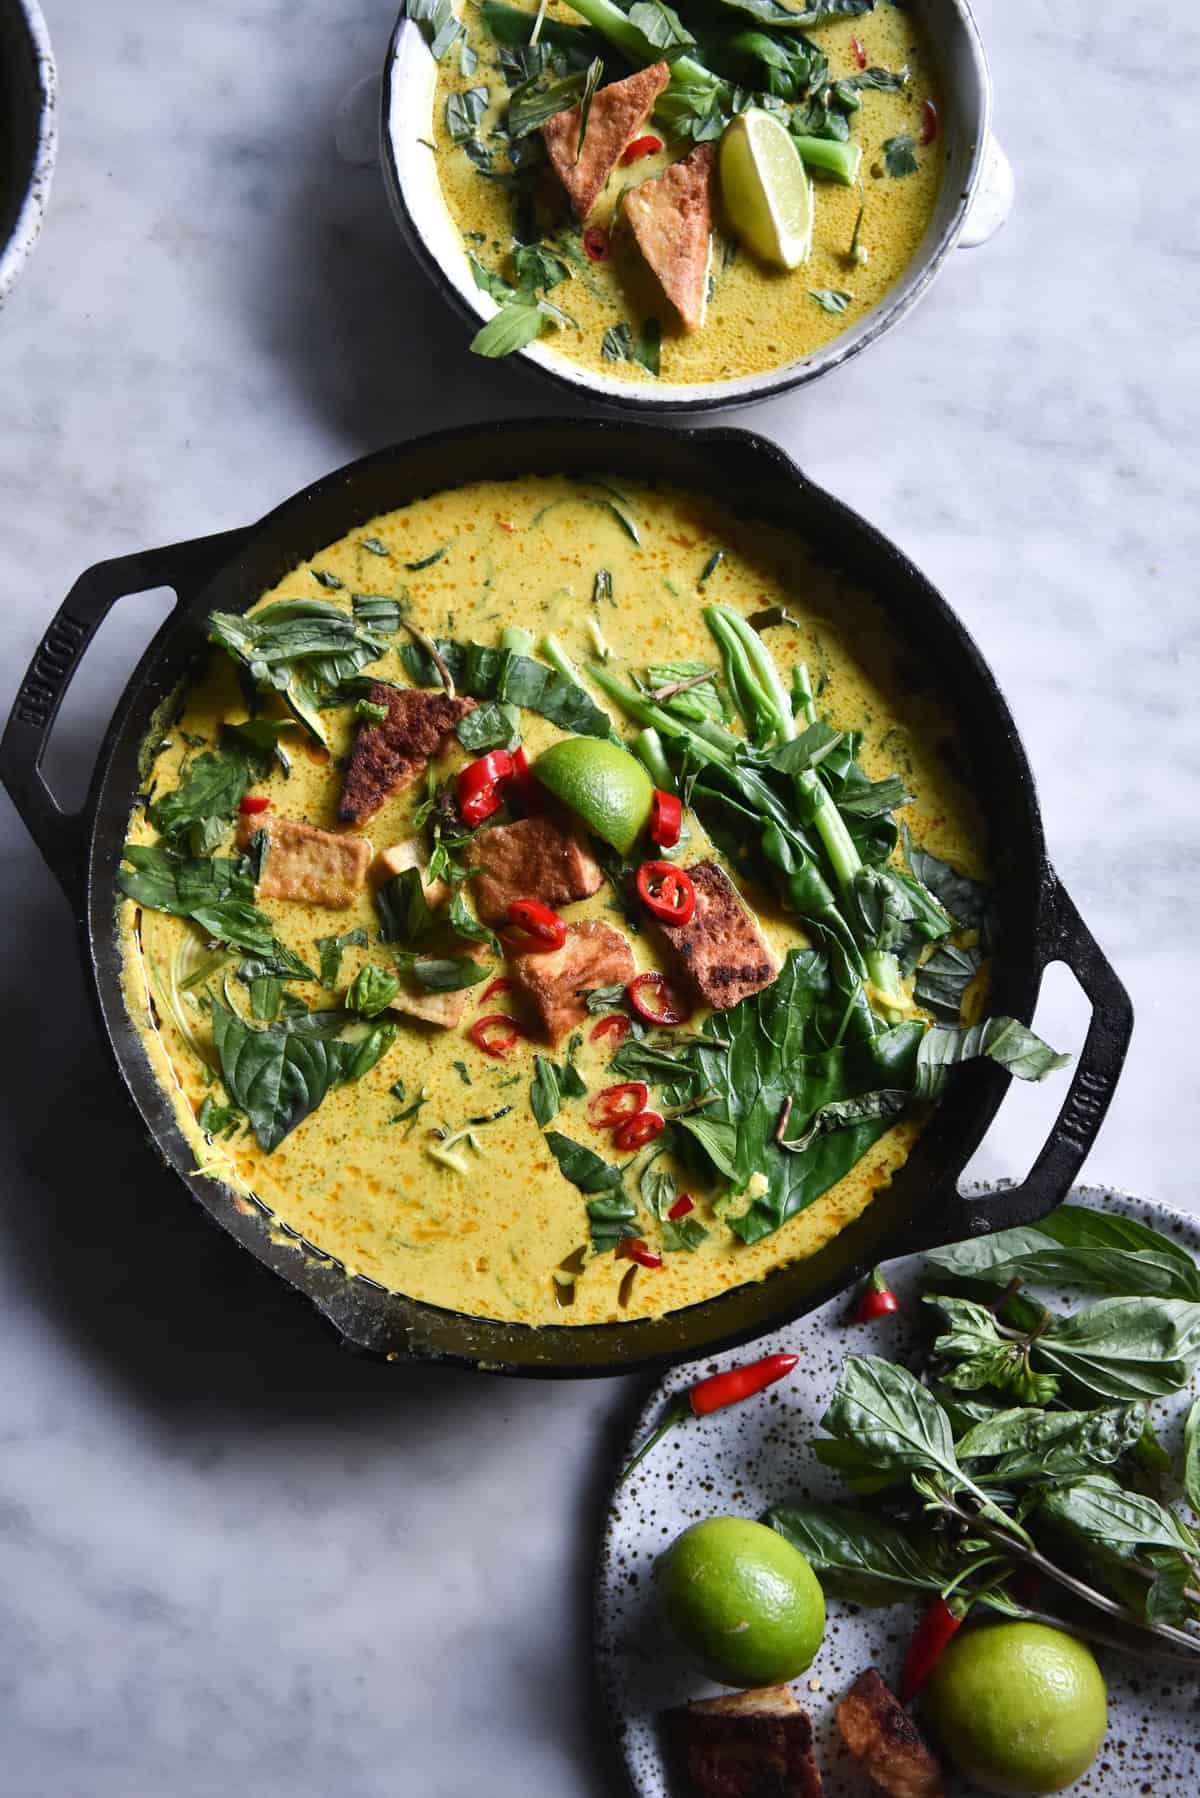 An aerial image of a vegan laksa in a black skillet atop a white marble table. The laksa has a golden yellow hue and is topped with fresh herbs, chilli, tofu puffs and a lime wedge.